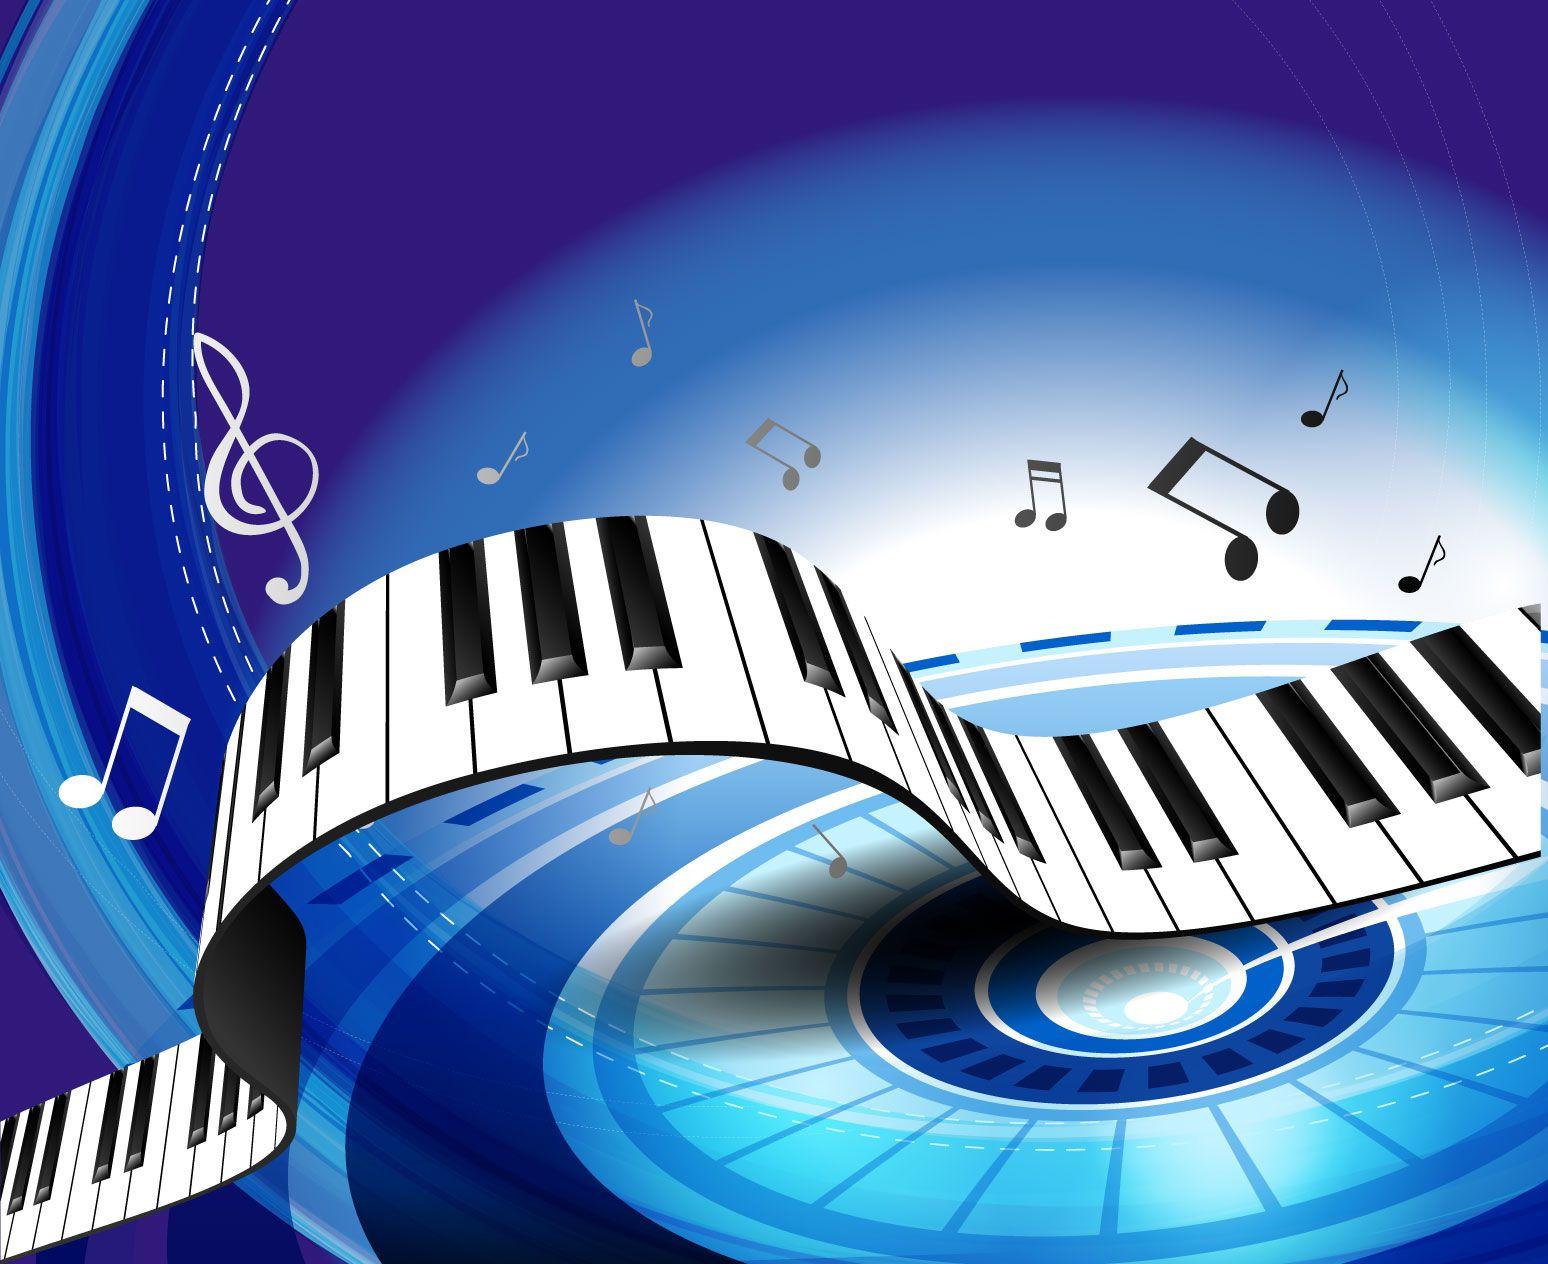 Gorgeous piano key background 04 vector Free Vector / 4Vector